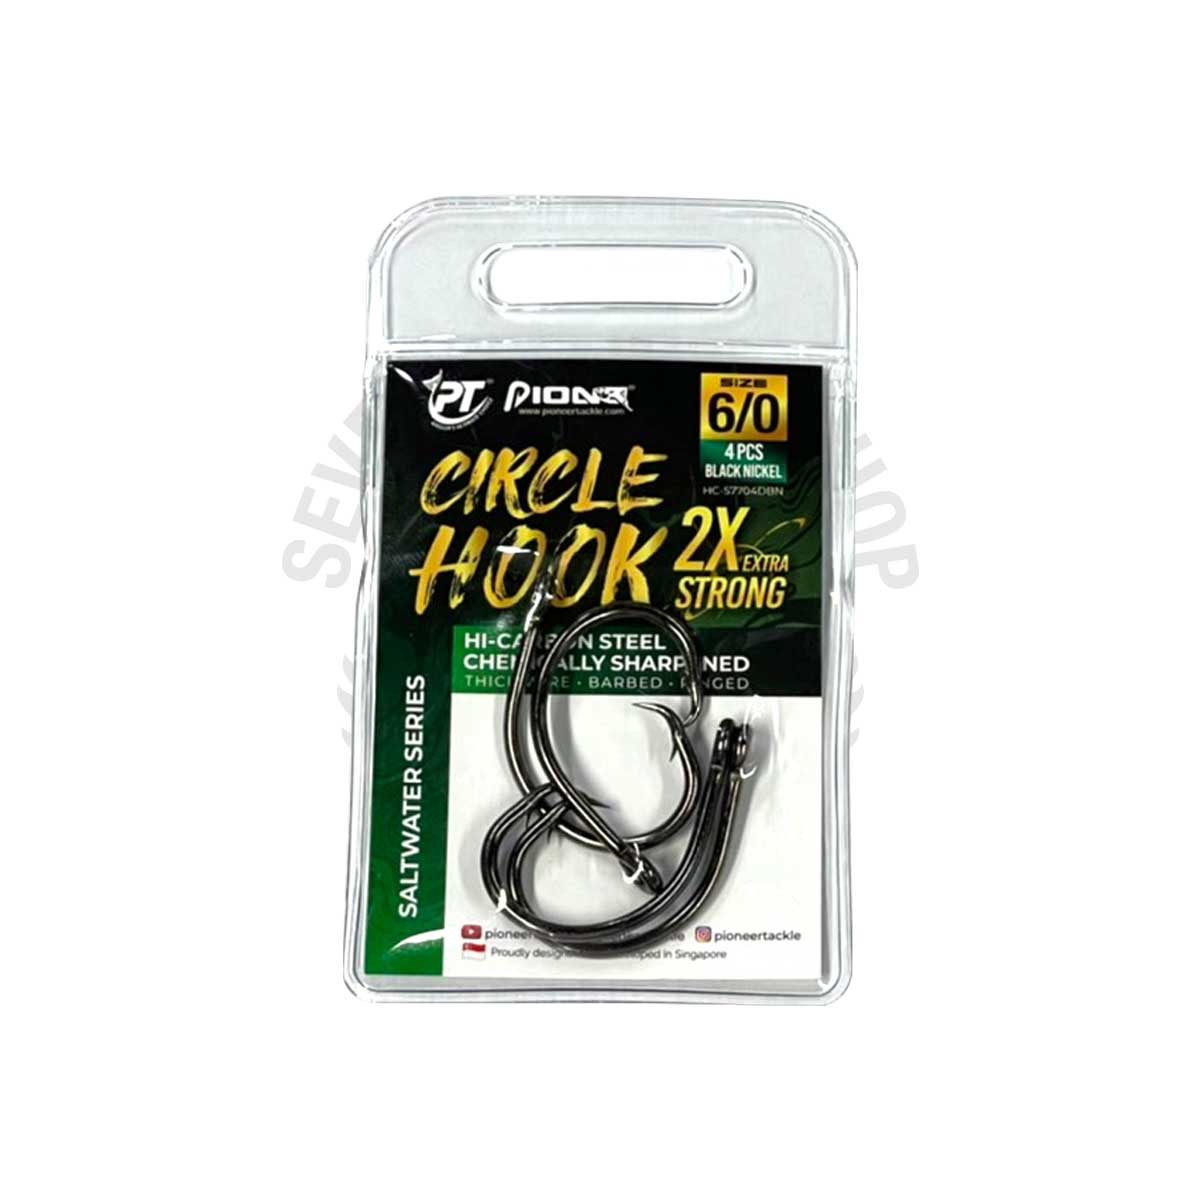 Pioneer Circle Hook 2X Extra Strong HC-57704DBN #6/0 - 7 SEAS PROSHOP  (THAILAND)